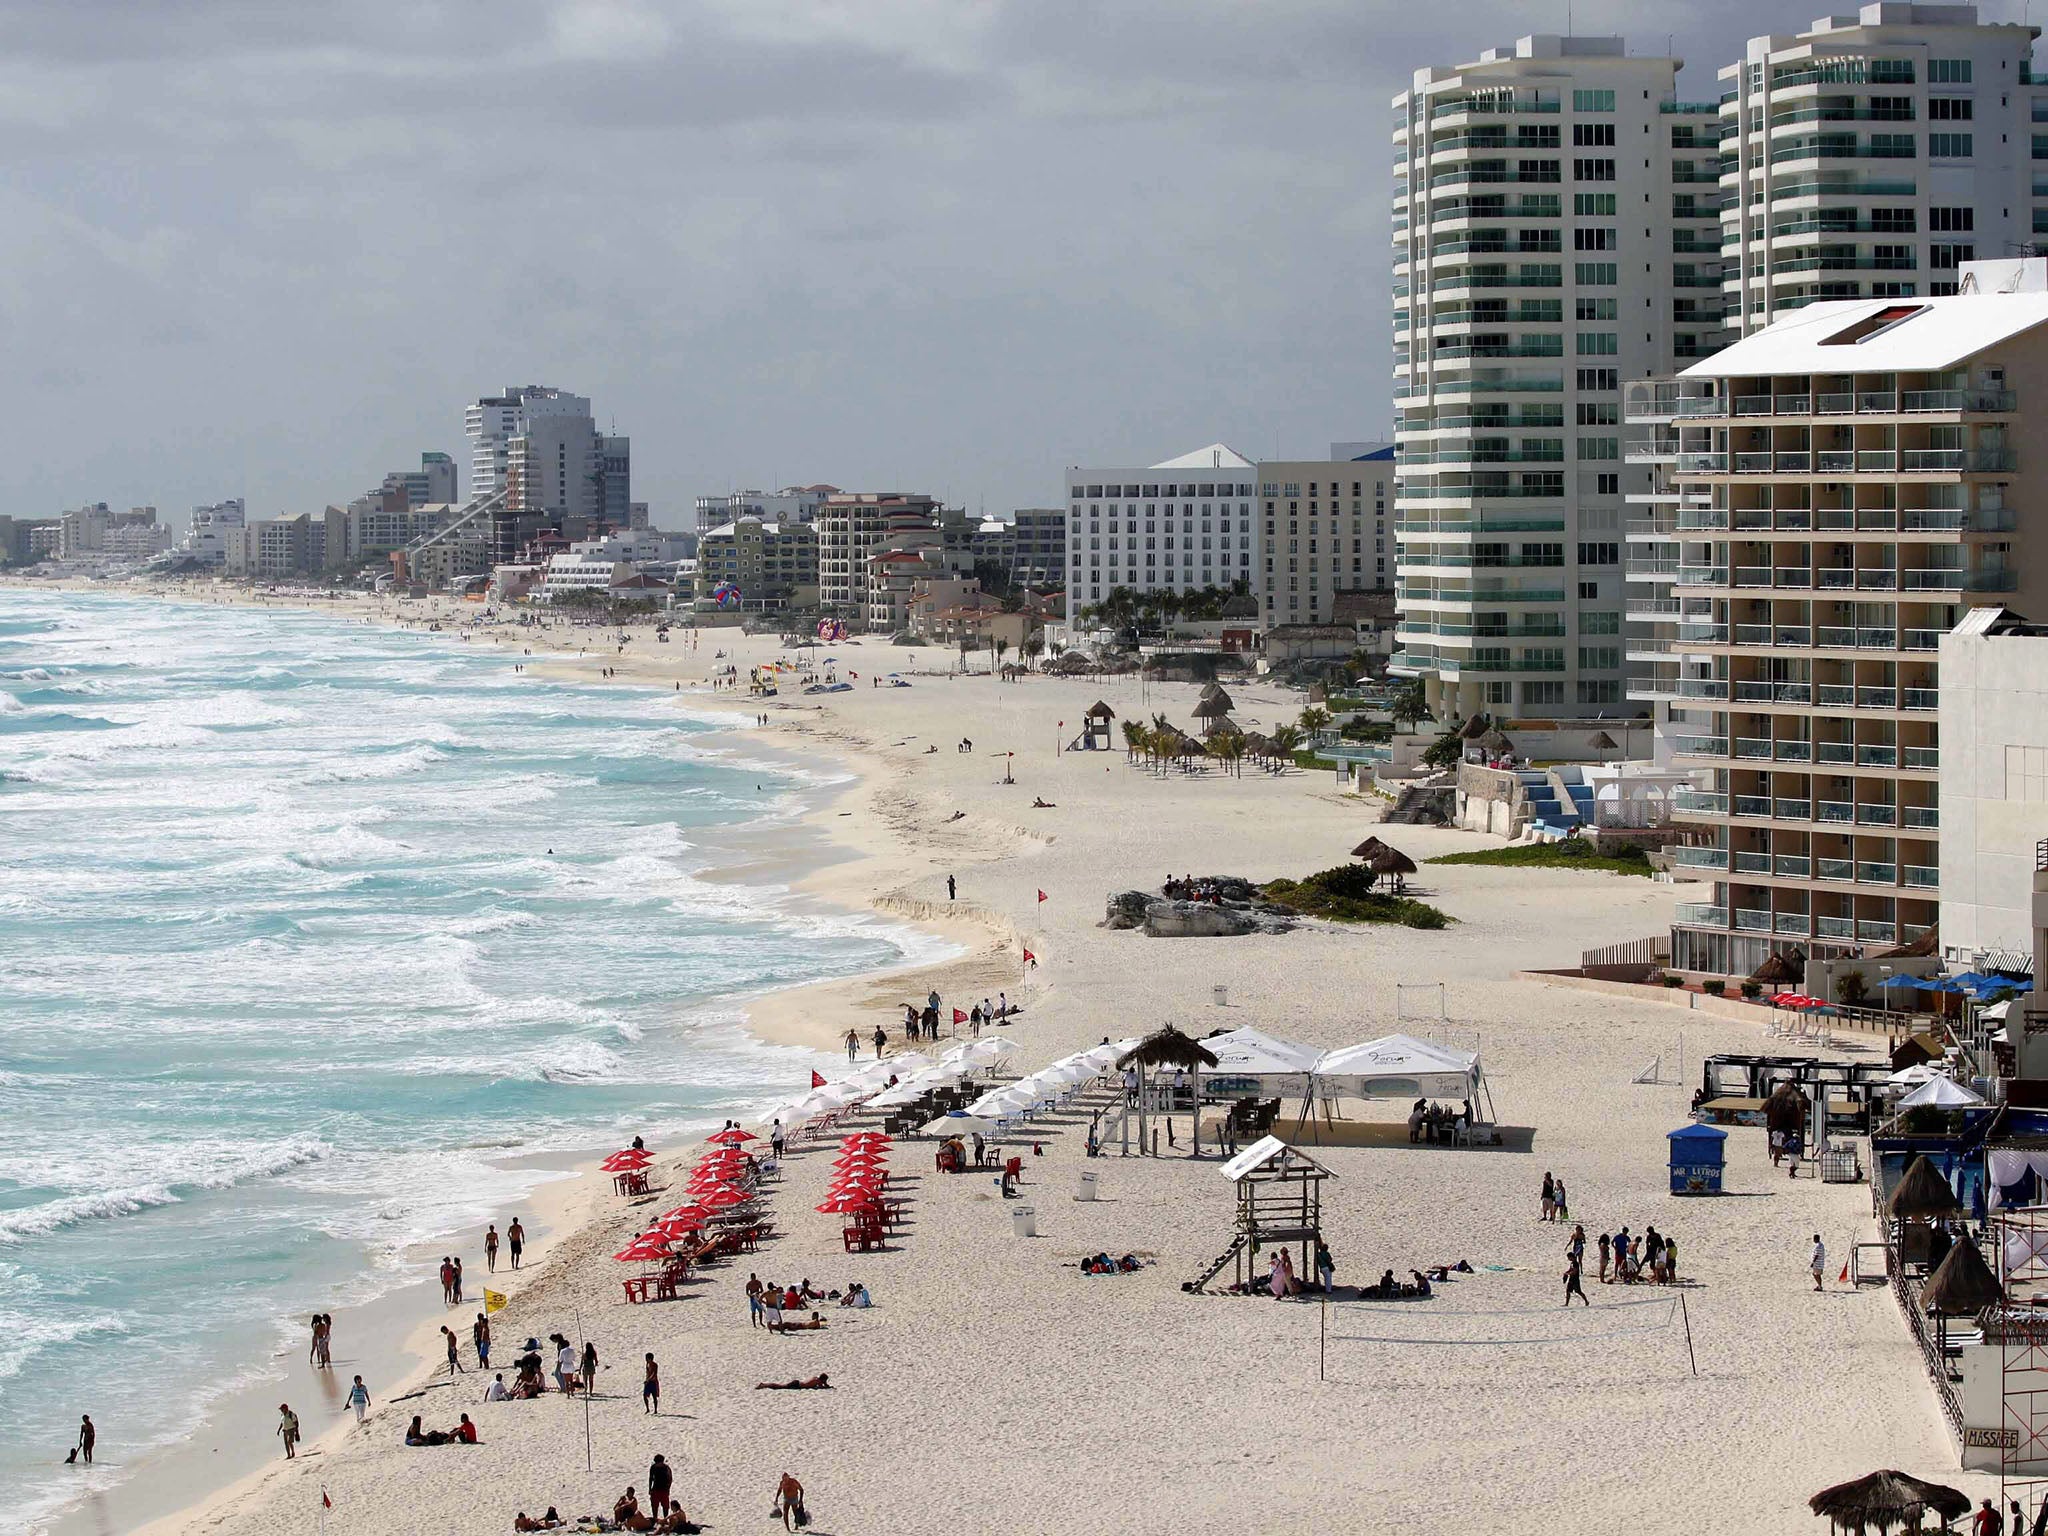 Now the Mexican state of Quintana Roo, whose main economic driving force is Cancun, has decided to fall into line with the eastern US by creating Mexico’s fourth time zone